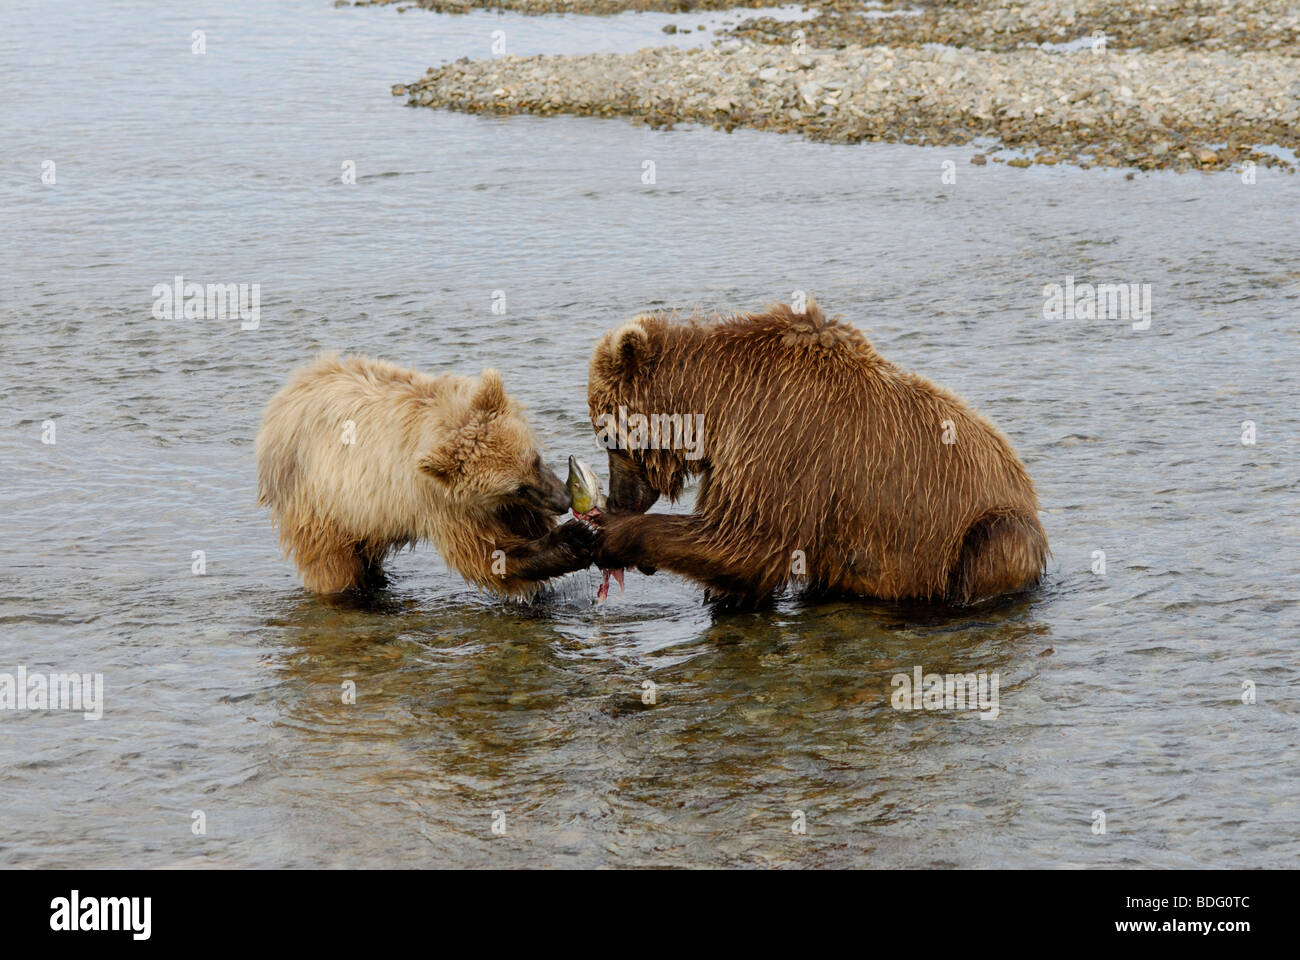 Brown bear or grizzly bear, Ursus arctos horribilis, sow sharing salmon with cub. Stock Photo